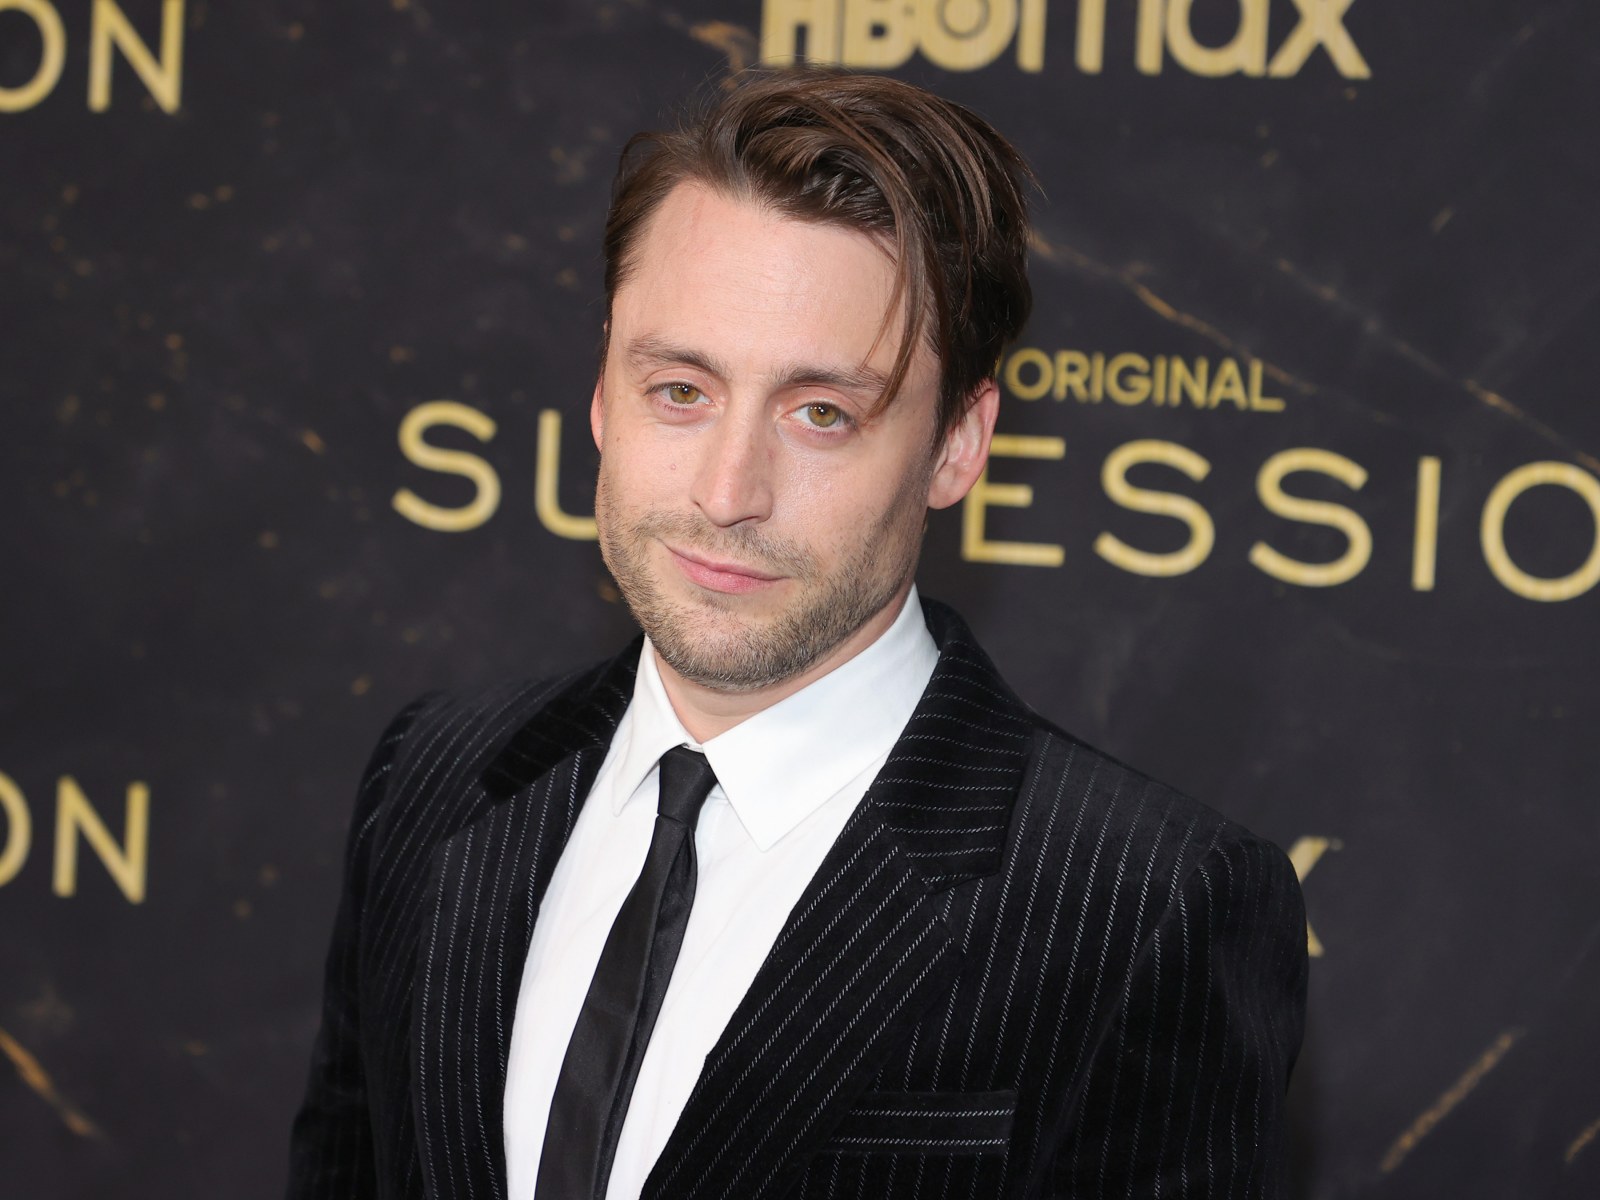 Kieran Culkin Told 'You're Awful' by Presenter in Awkward 'Succession'  Interview